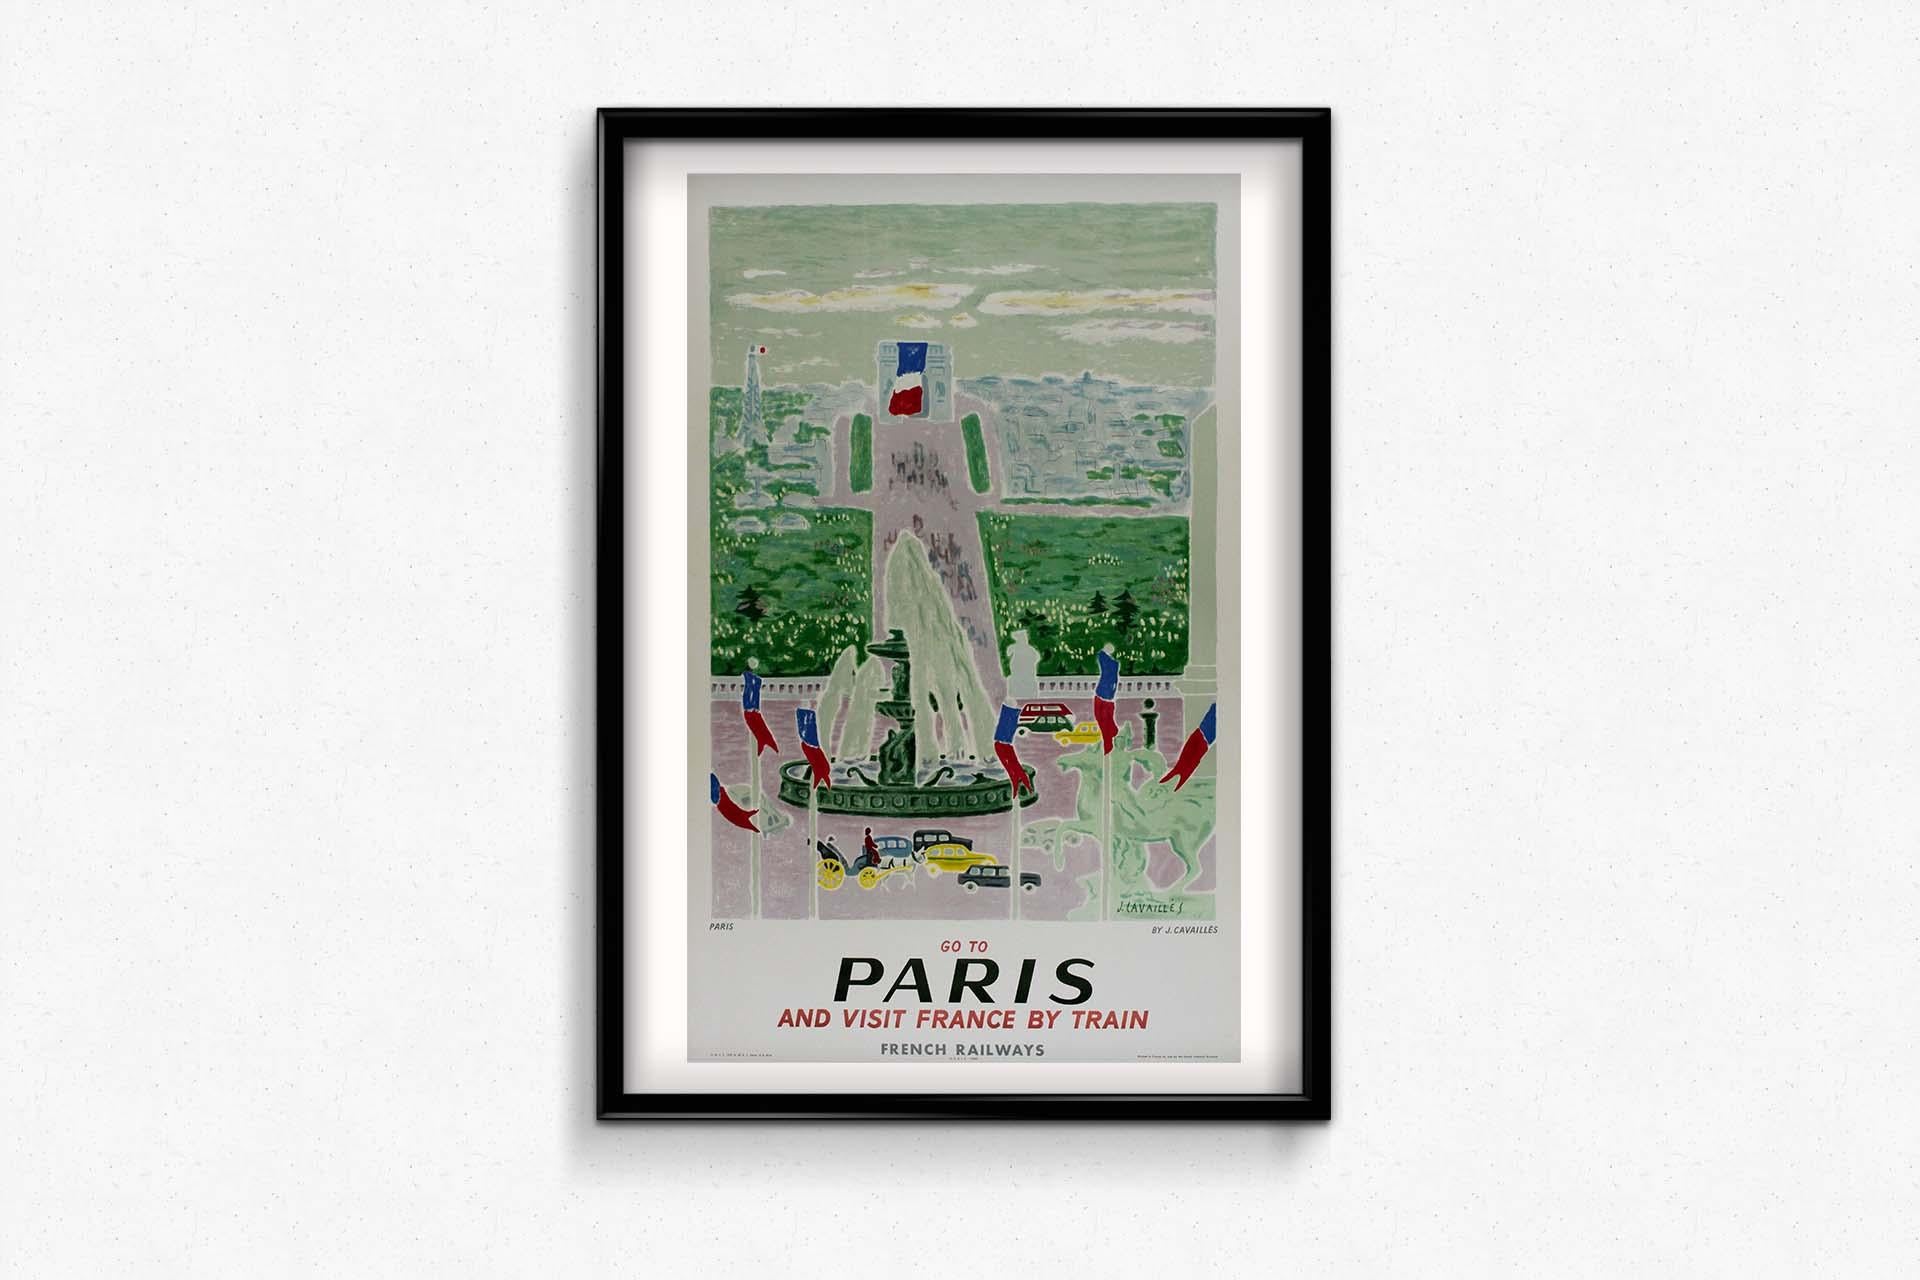 Jules Cavaillès' 1957 SNCF poster is a visual masterpiece that beckons travelers to embark on a colorful and artistic journey to Paris and explore the beauty of France by train. This iconic poster celebrates the charm of train travel, offering